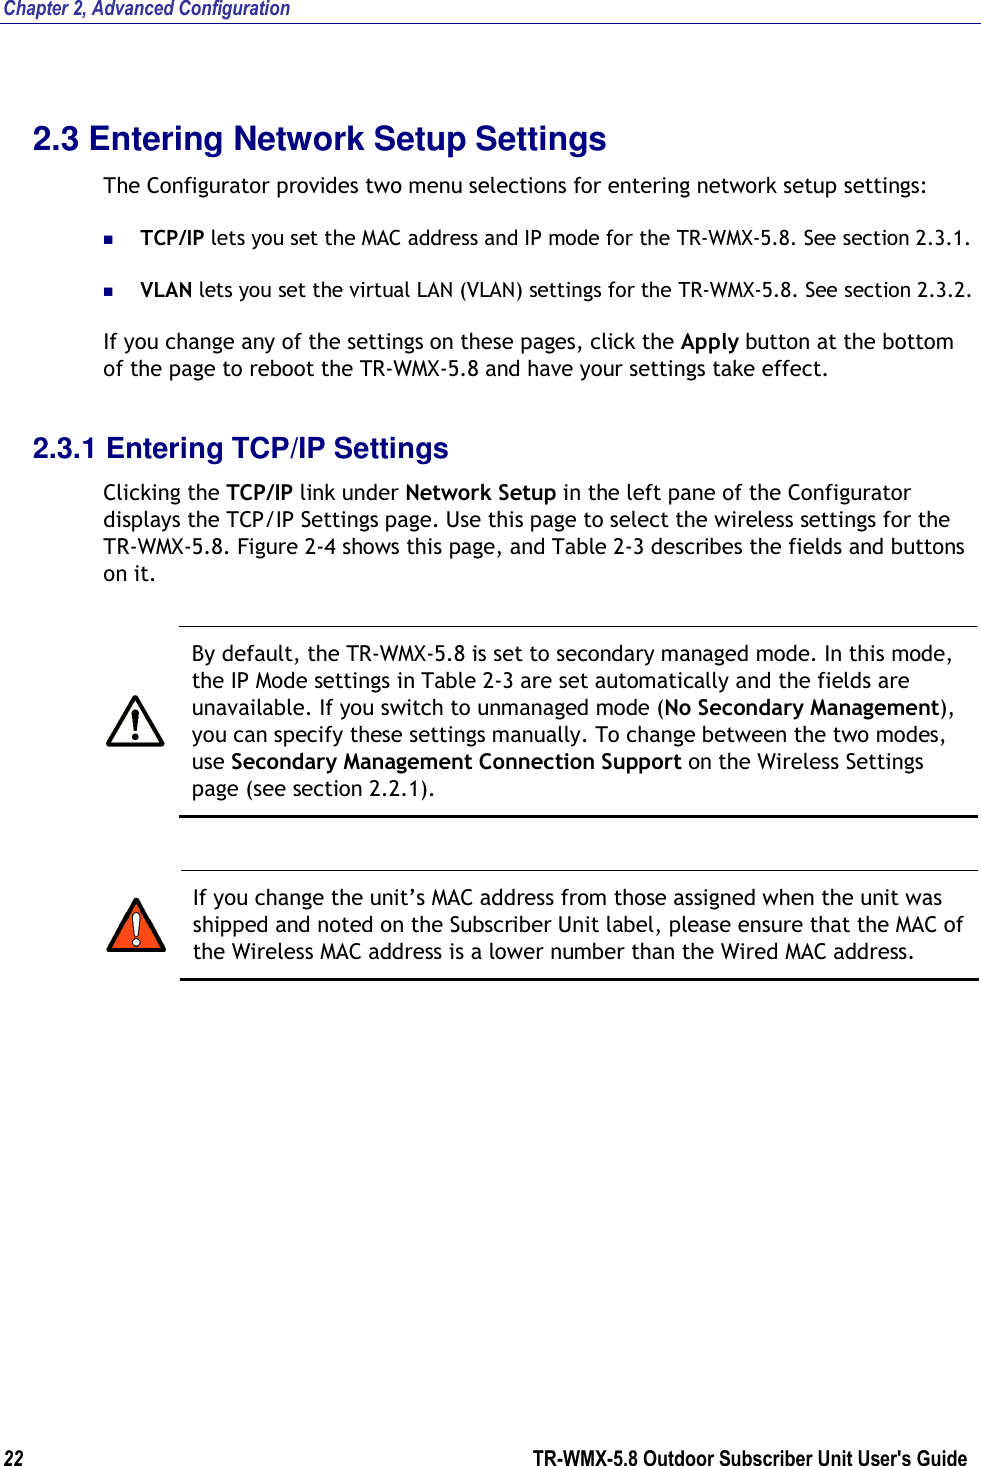 Chapter 2, Advanced Configuration 22        TR-WMX-5.8 Outdoor Subscriber Unit User&apos;s Guide  2.3 Entering Network Setup Settings The Configurator provides two menu selections for entering network setup settings:  TCP/IP lets you set the MAC address and IP mode for the TR-WMX-5.8. See section 2.3.1.  VLAN lets you set the virtual LAN (VLAN) settings for the TR-WMX-5.8. See section 2.3.2. If you change any of the settings on these pages, click the Apply button at the bottom of the page to reboot the TR-WMX-5.8 and have your settings take effect. 2.3.1 Entering TCP/IP Settings Clicking the TCP/IP link under Network Setup in the left pane of the Configurator displays the TCP/IP Settings page. Use this page to select the wireless settings for the TR-WMX-5.8. Figure 2-4 shows this page, and Table 2-3 describes the fields and buttons on it.   By default, the TR-WMX-5.8 is set to secondary managed mode. In this mode, the IP Mode settings in Table 2-3 are set automatically and the fields are unavailable. If you switch to unmanaged mode (No Secondary Management), you can specify these settings manually. To change between the two modes, use Secondary Management Connection Support on the Wireless Settings page (see section 2.2.1).   If you change the unit’s MAC address from those assigned when the unit was shipped and noted on the Subscriber Unit label, please ensure that the MAC of the Wireless MAC address is a lower number than the Wired MAC address. 